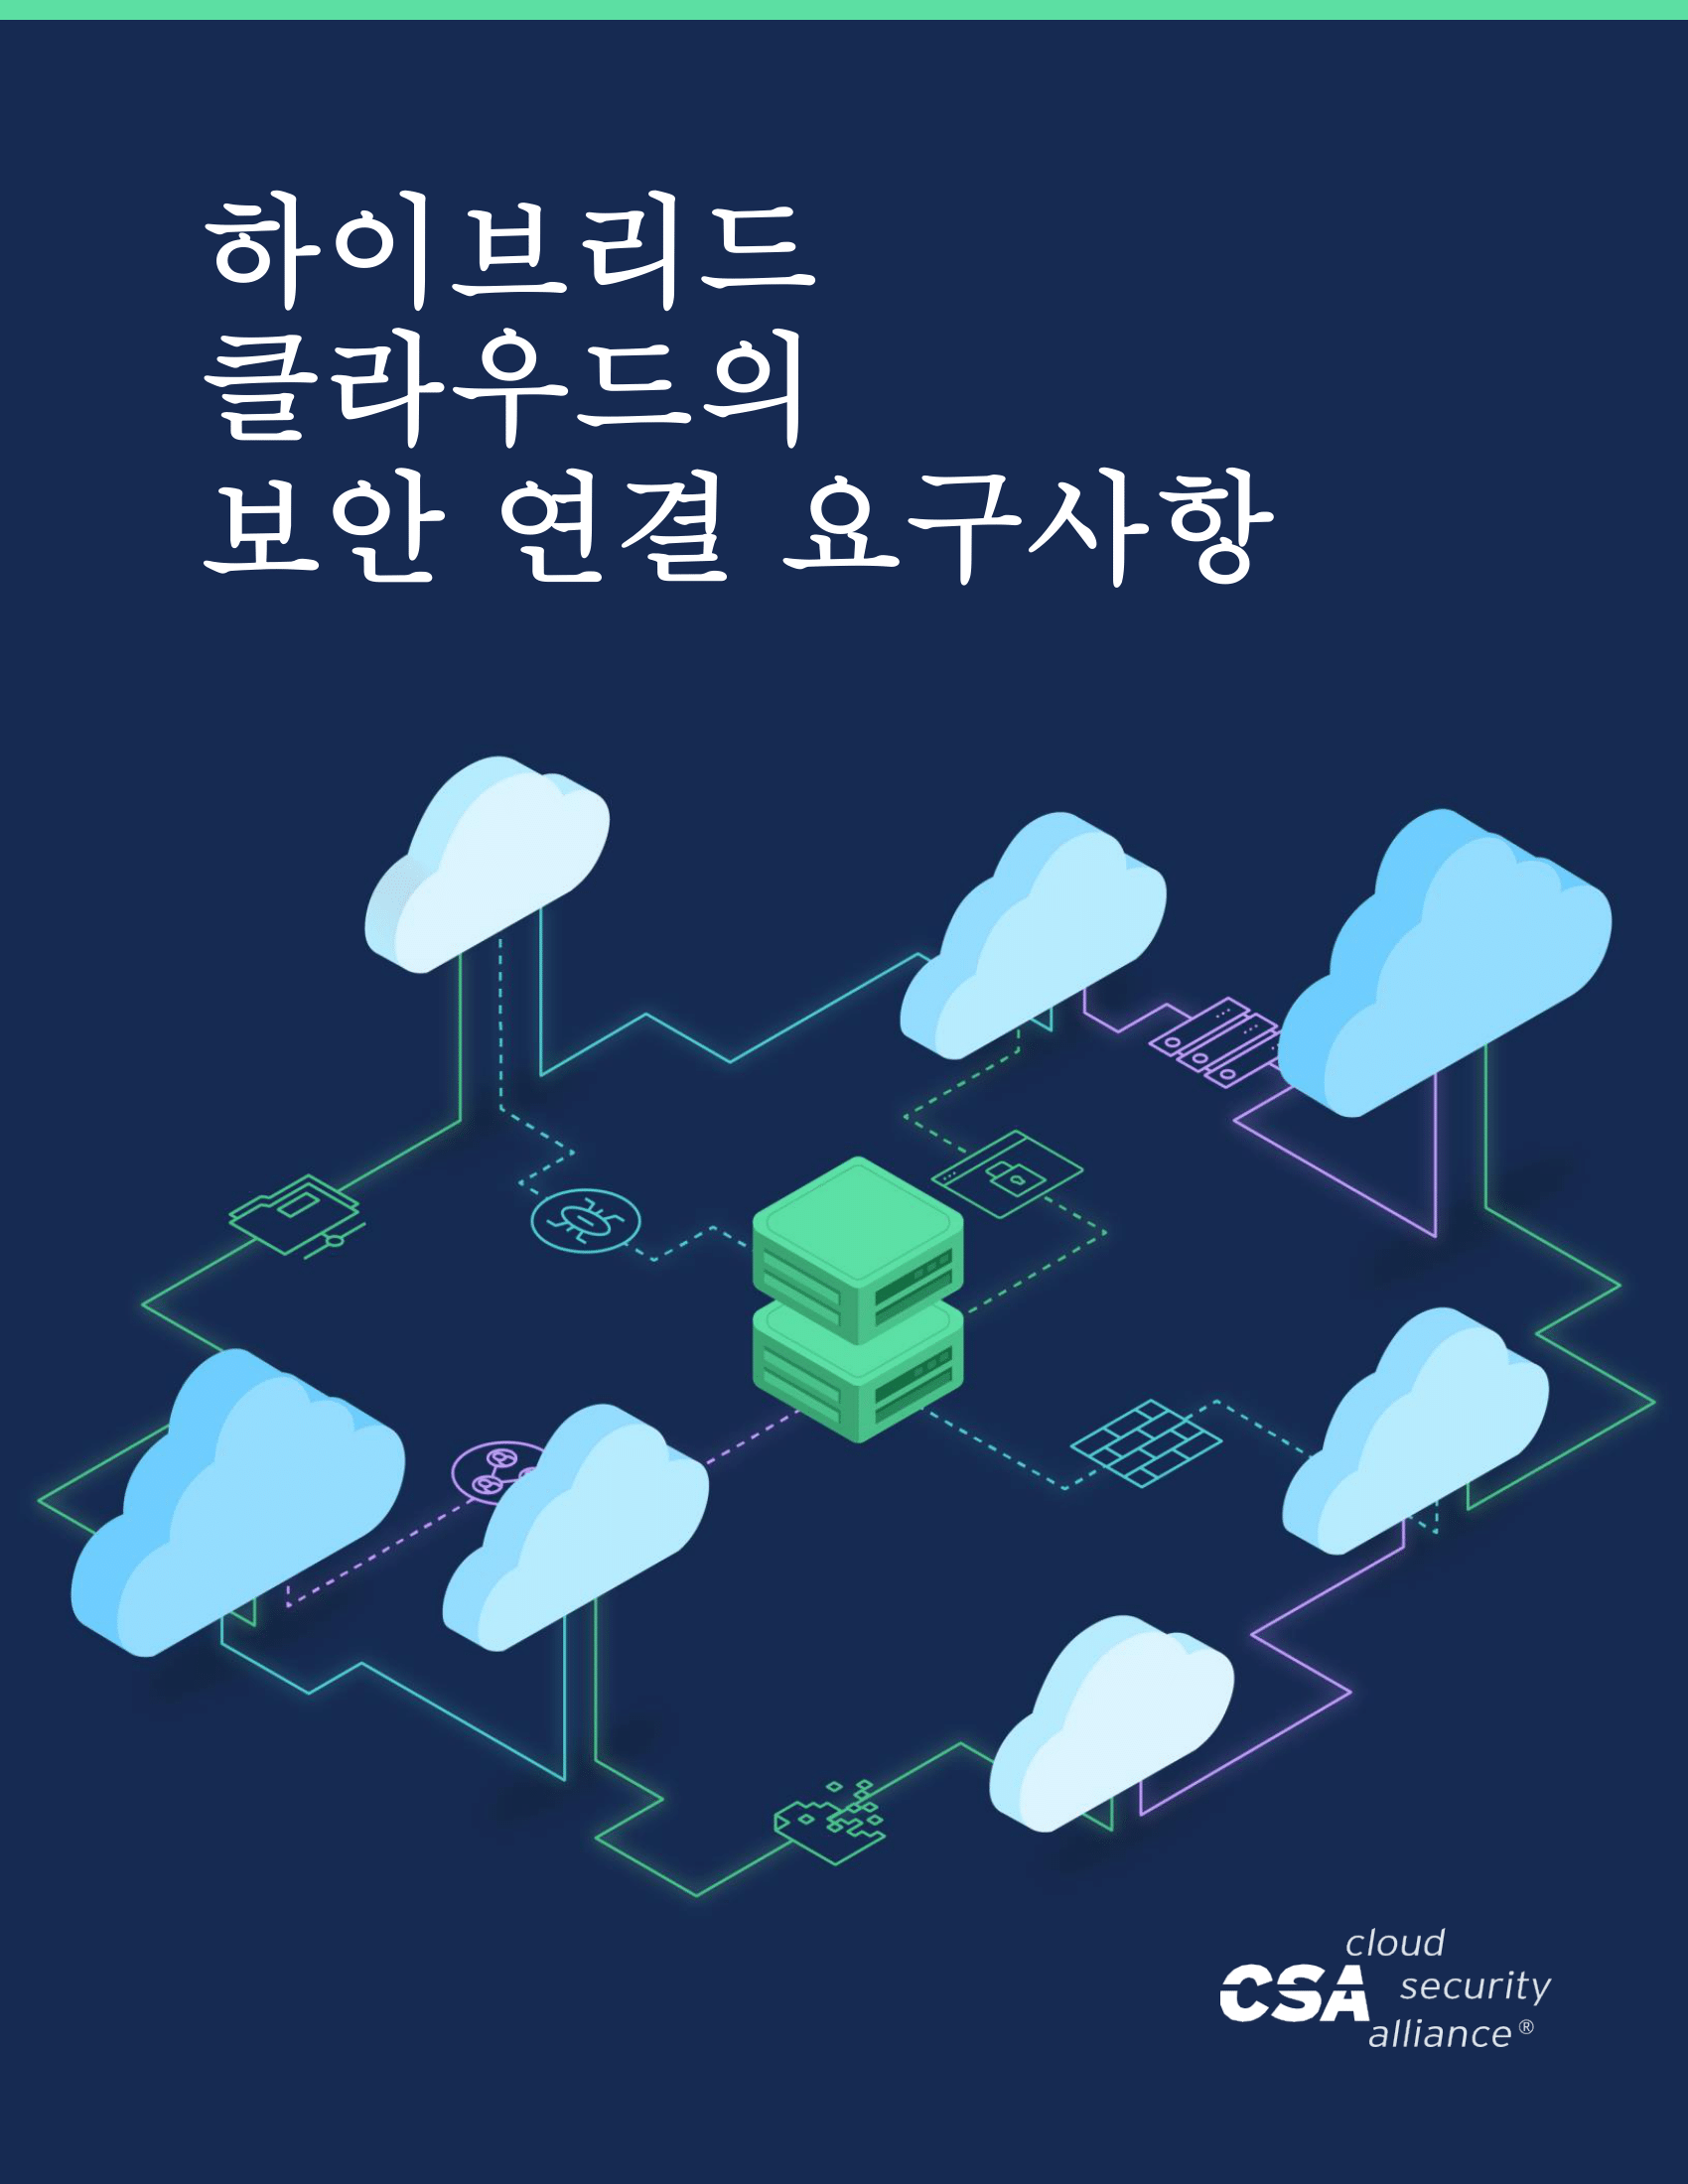 Secure Connection Requirements of Hybrid Cloud - Korean Translation 